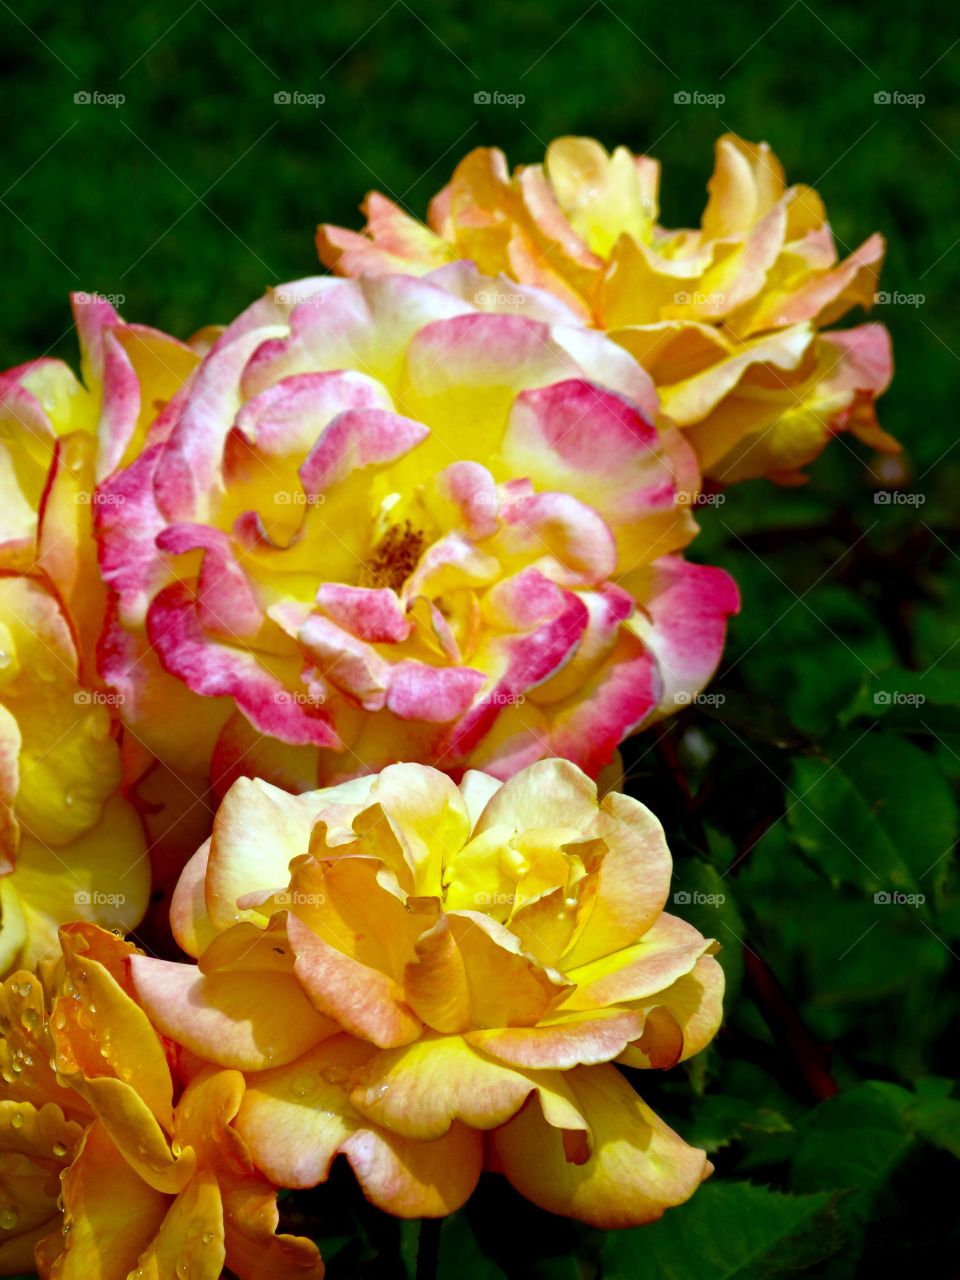 yellow roses with pink edges. Big bold beautiful roses! yellow with bright pink edges.